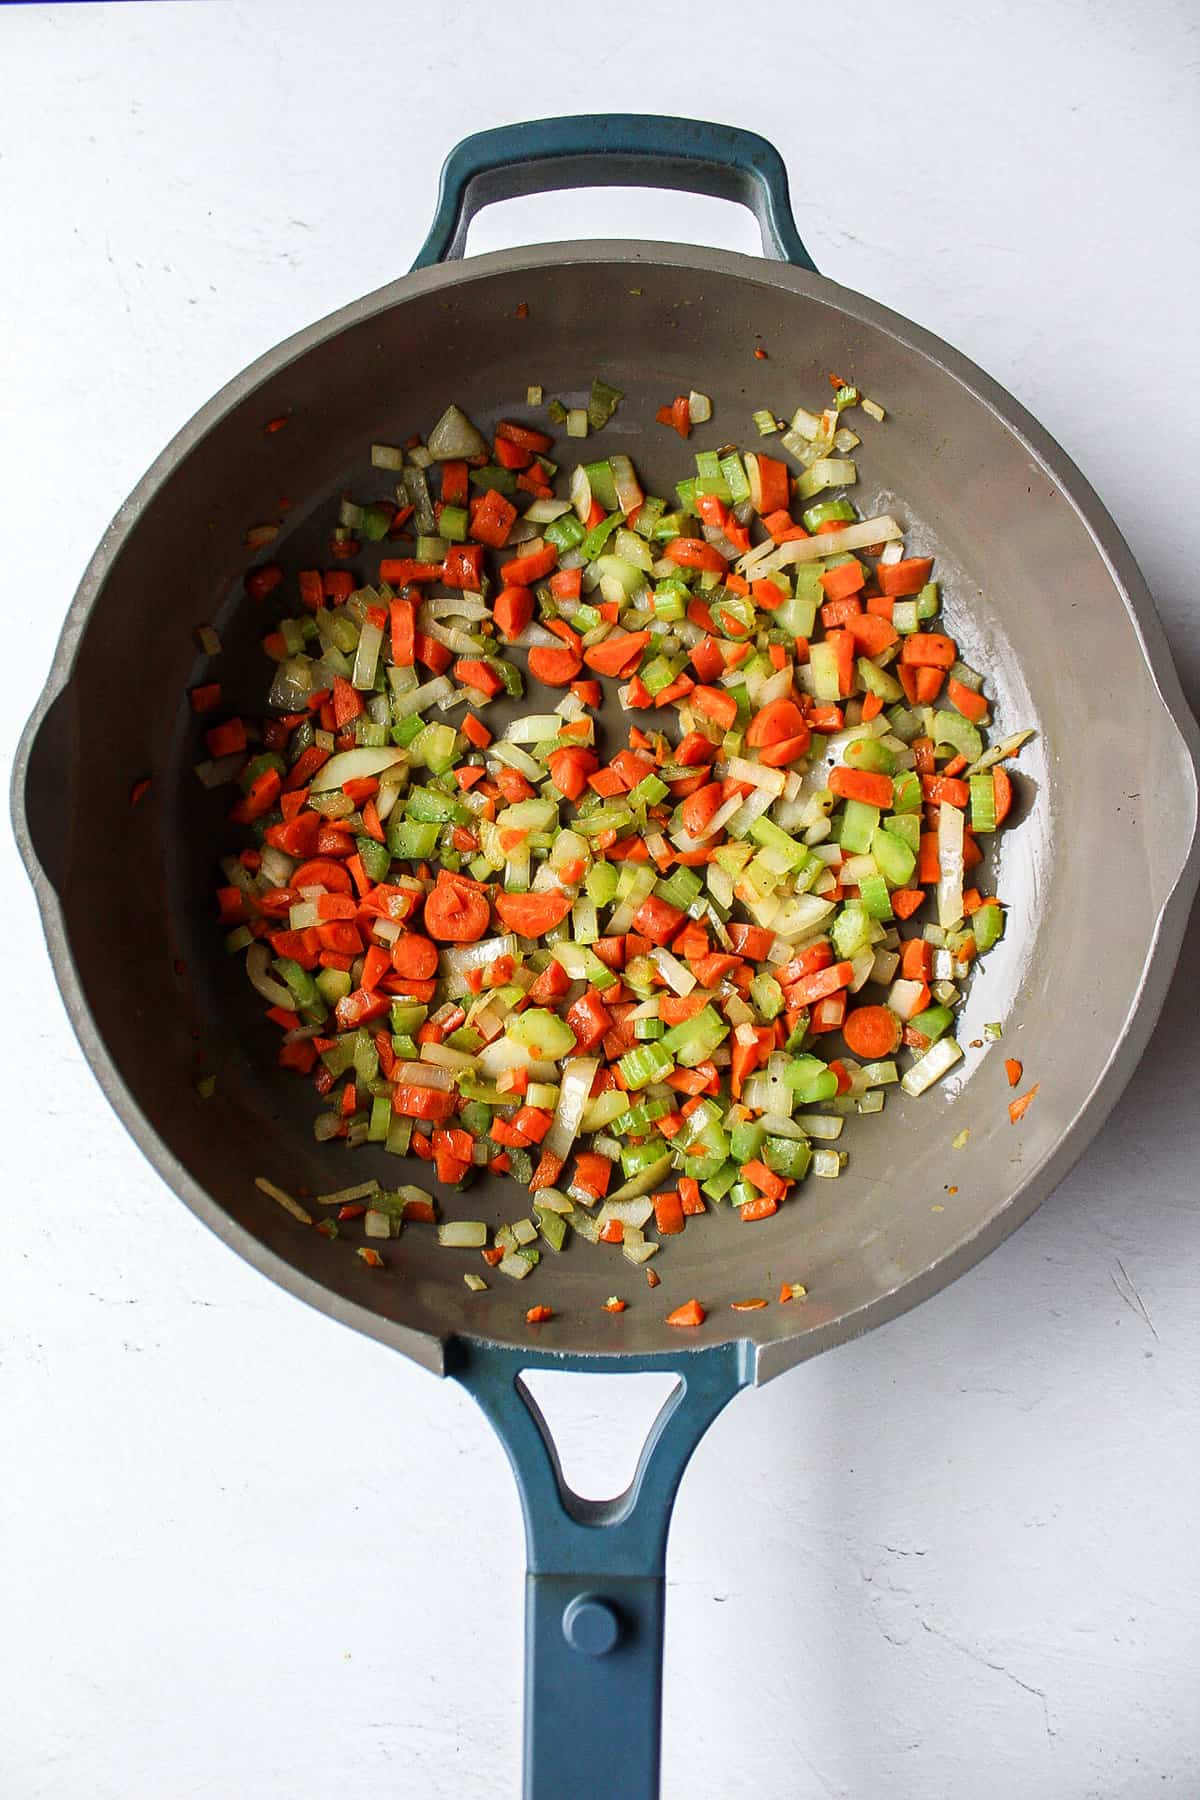 mirepoix of carrot, onion, and celery in a skillet.